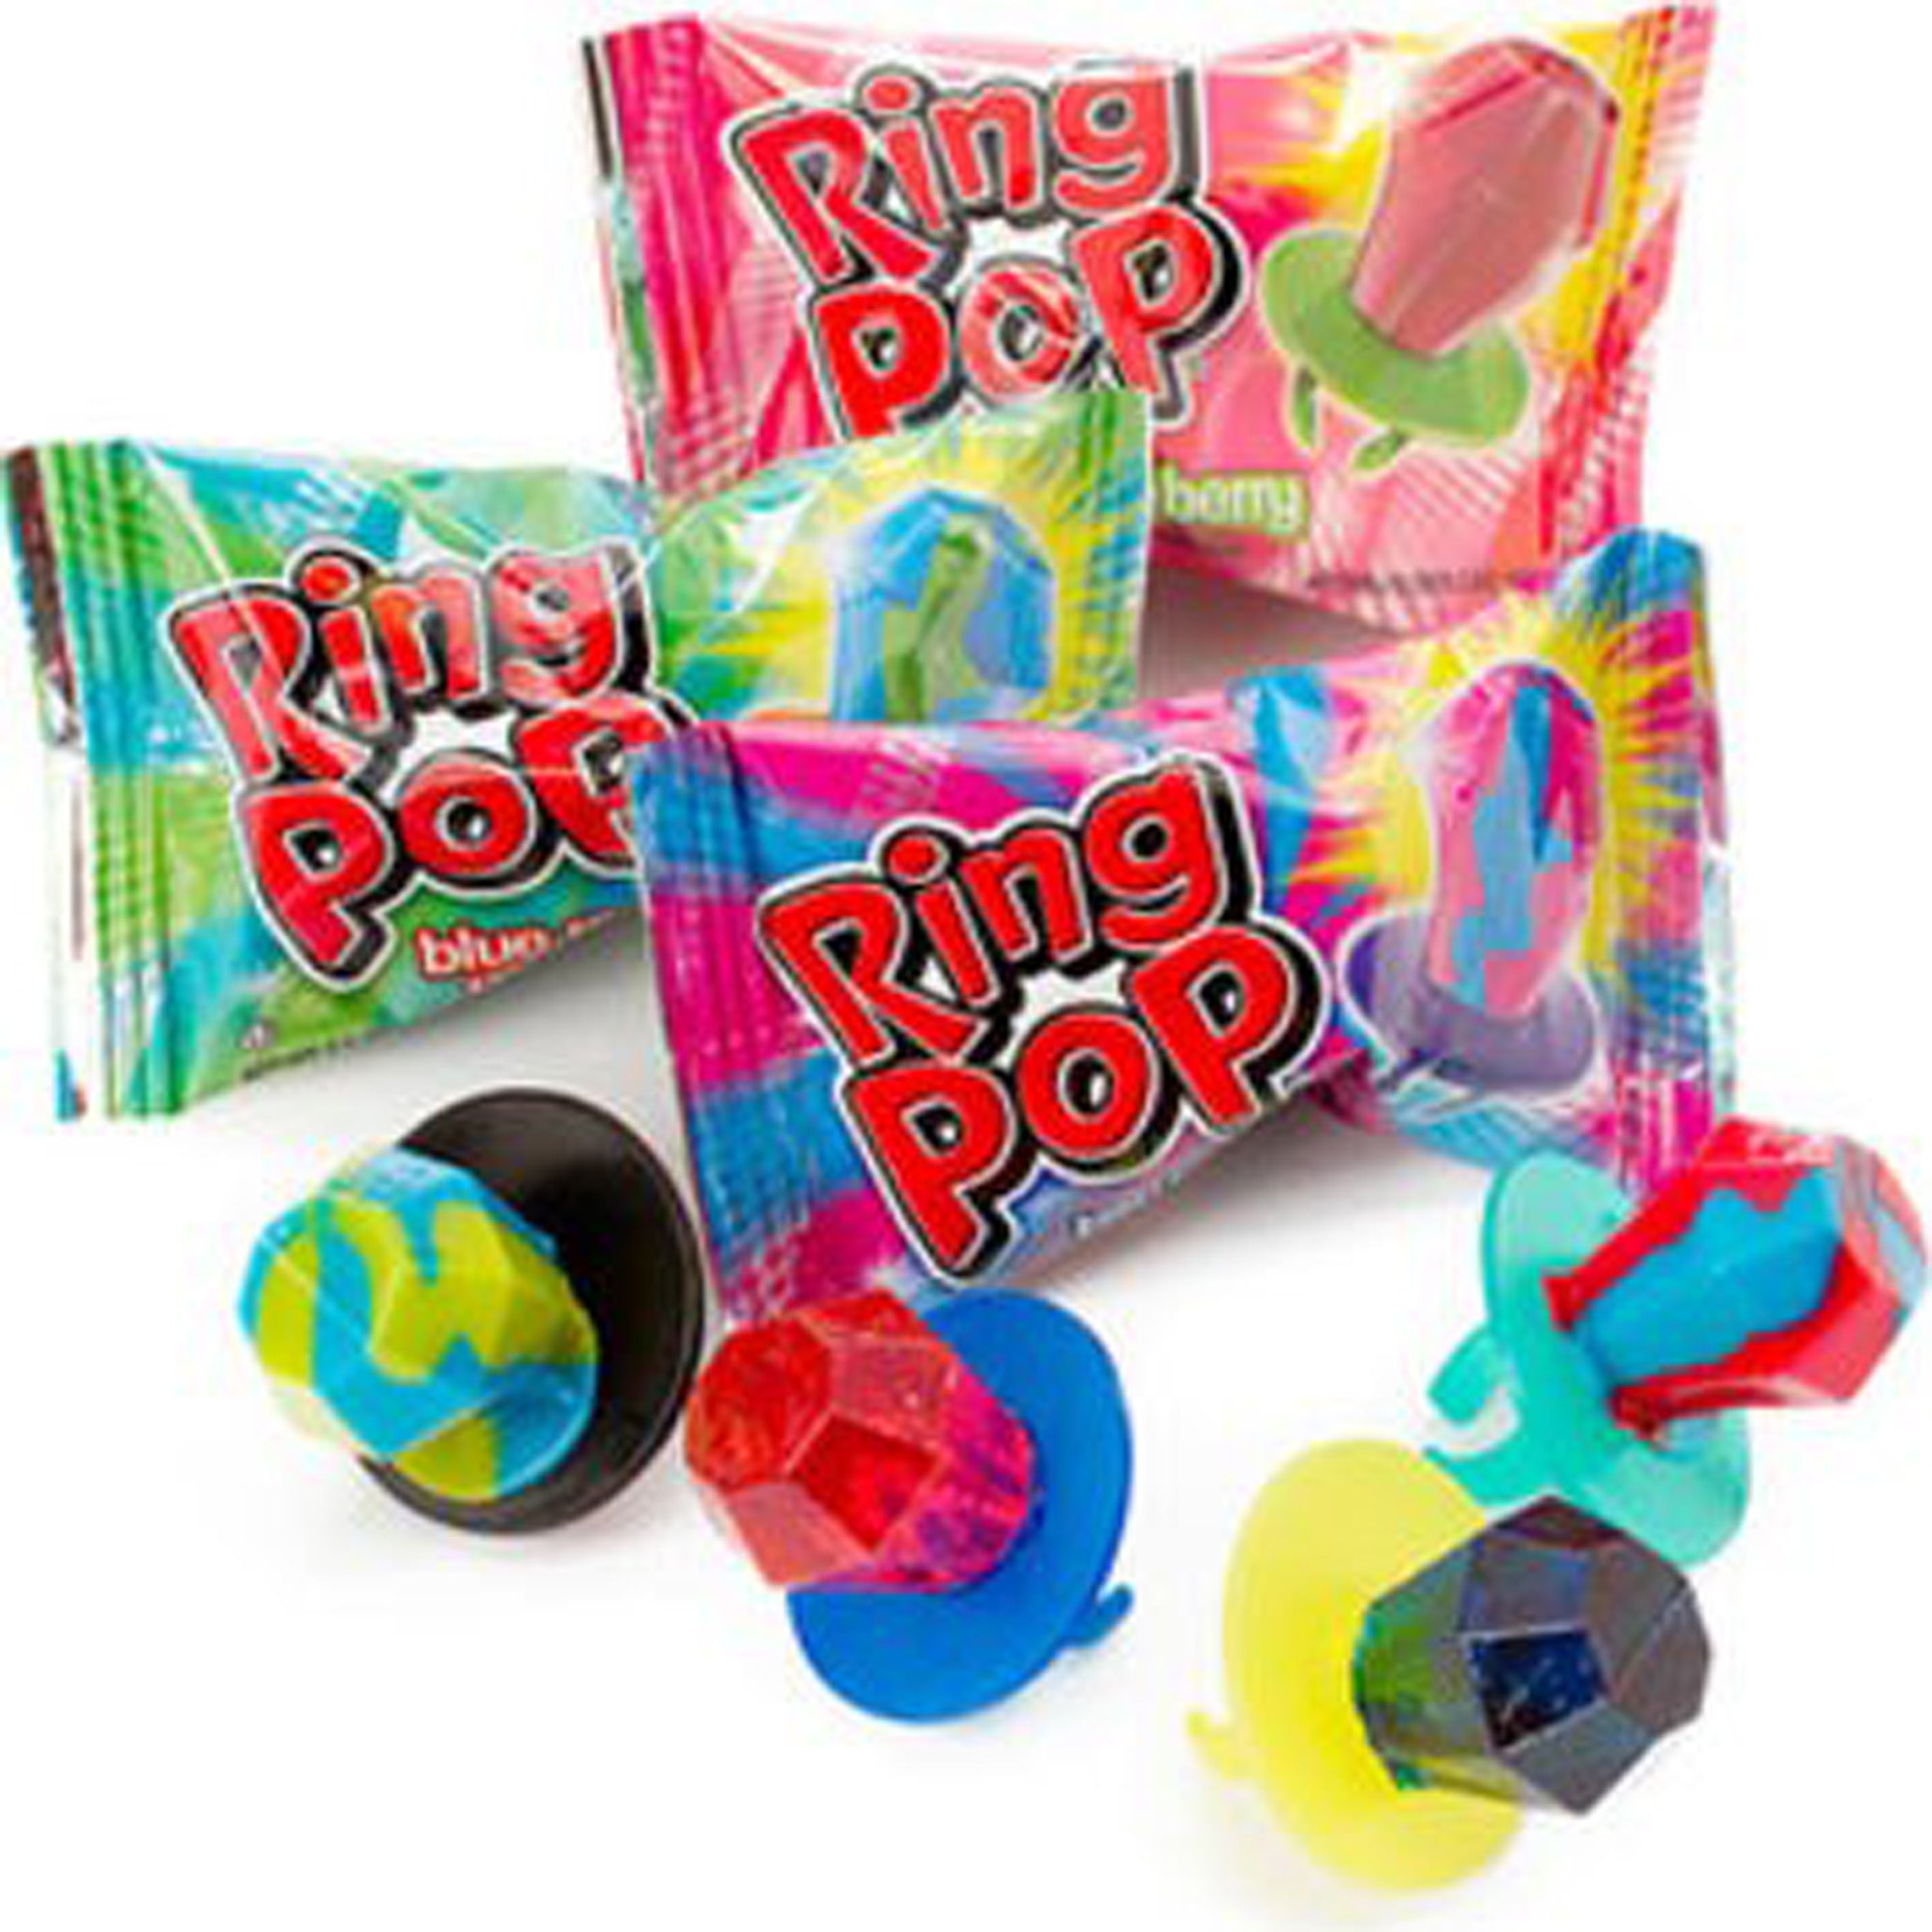 Ring Pop Candy Twisted, assortment, 1 count